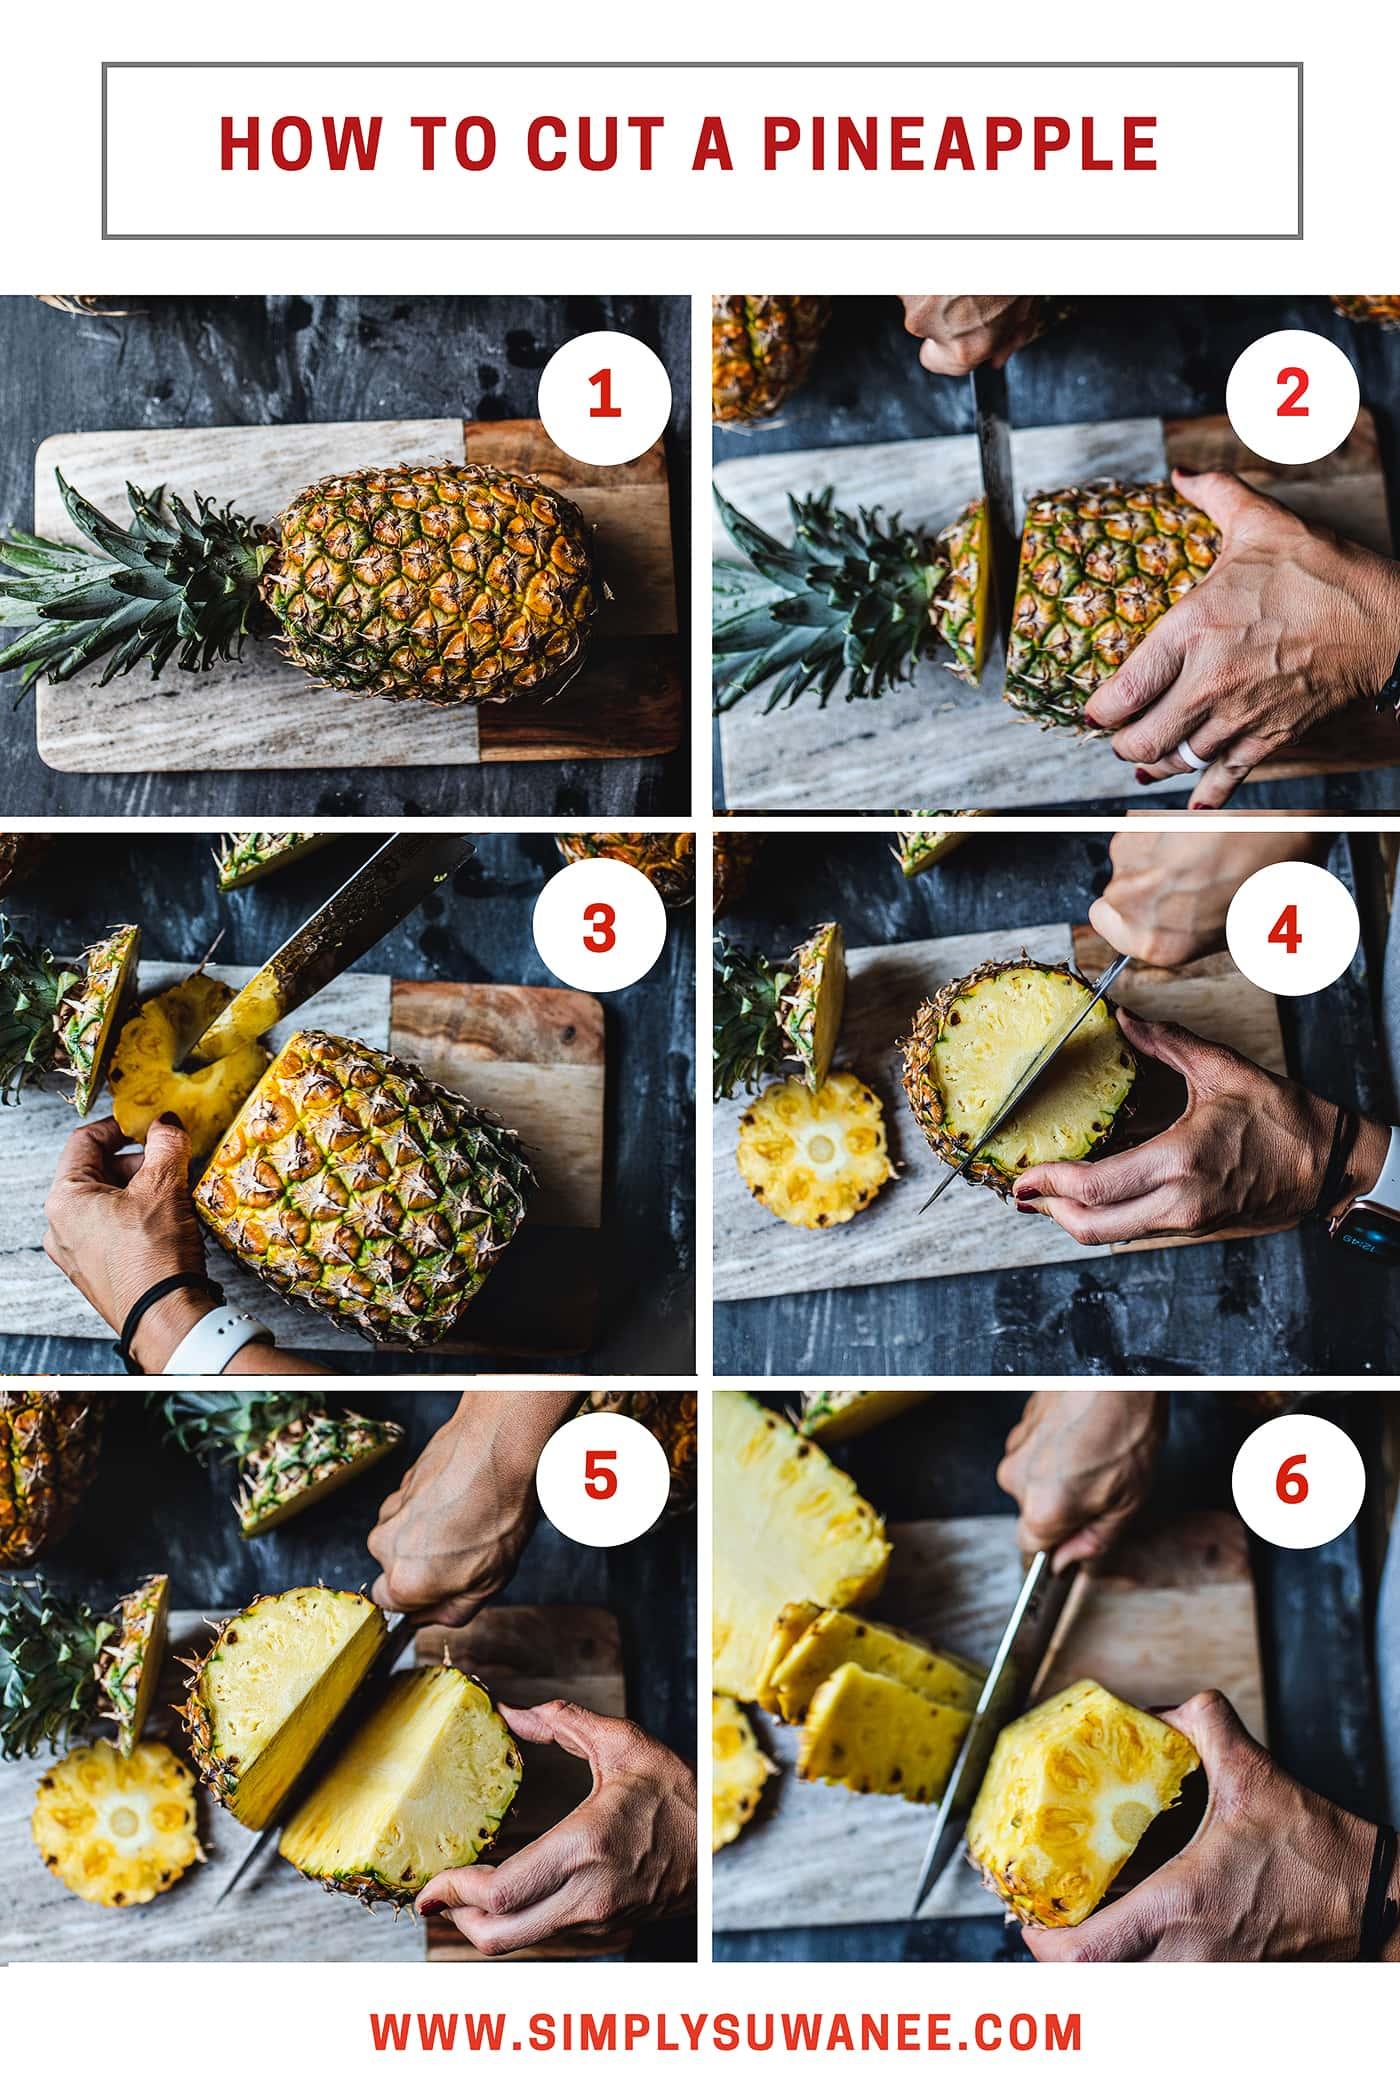 Do you love pineapples but have always been intimidated by how to cut them? Today, I